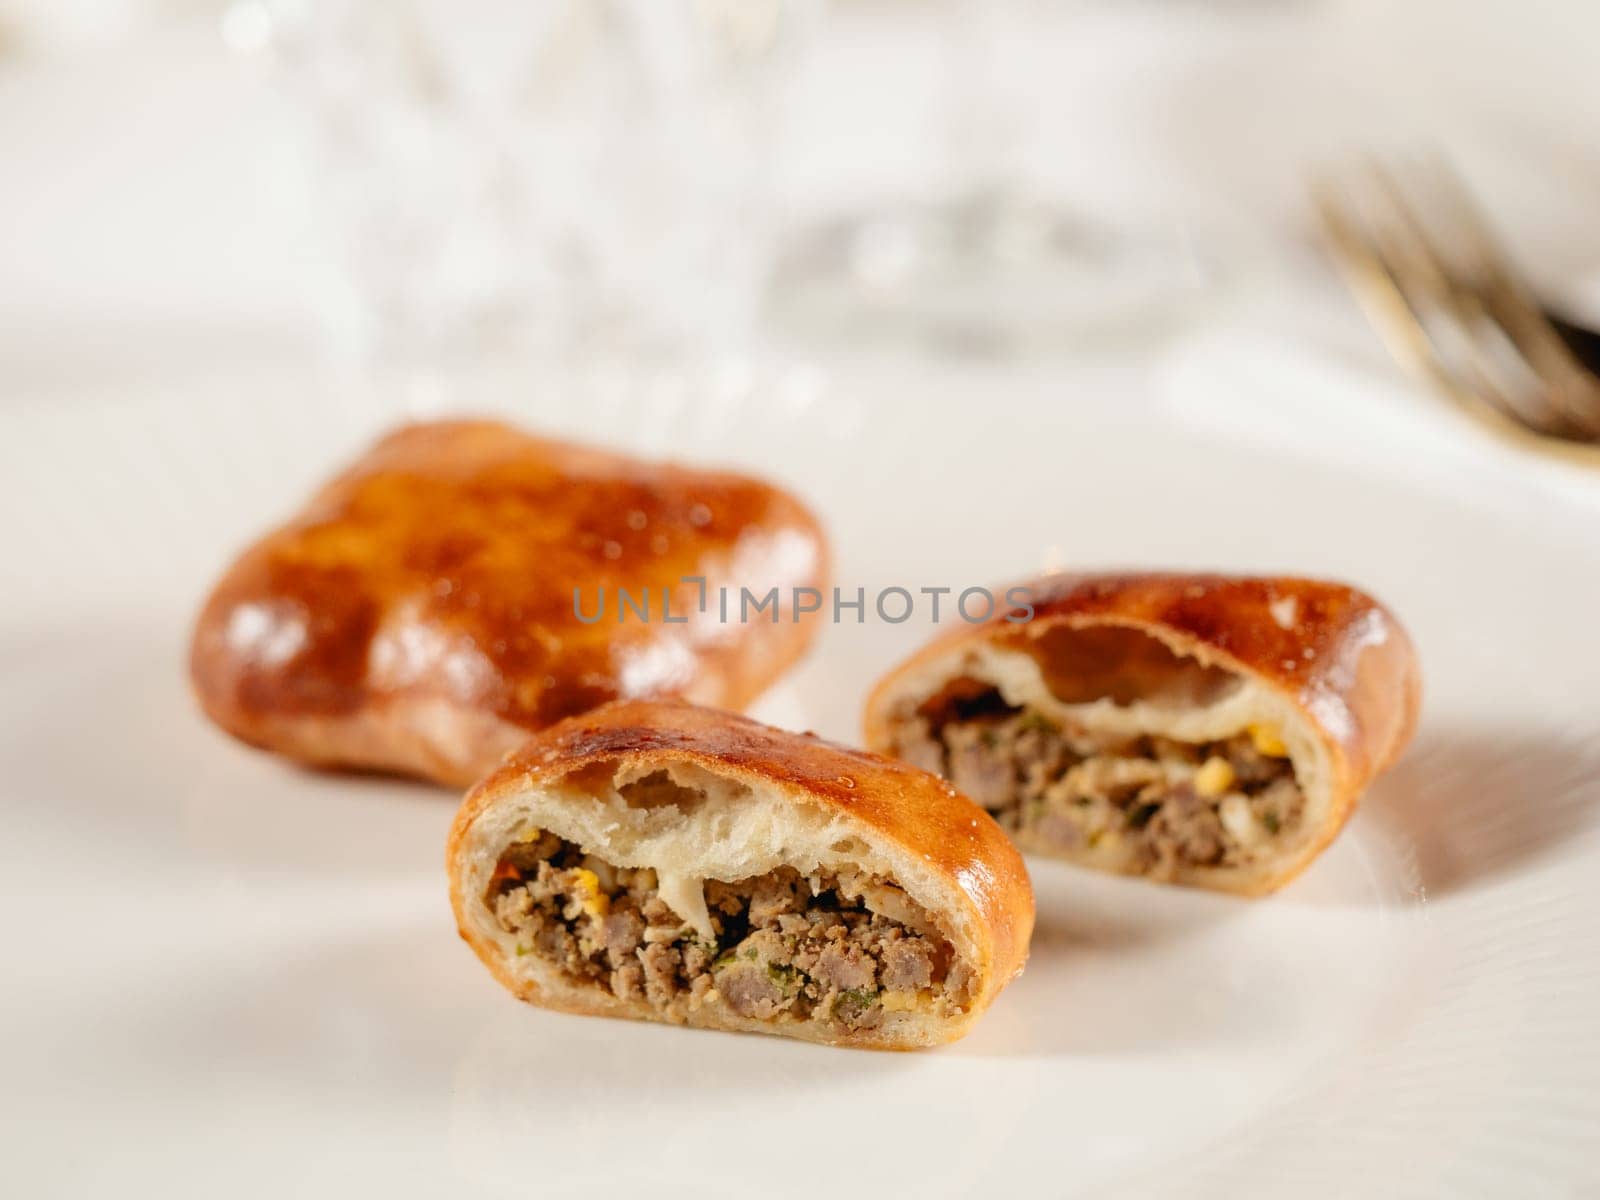 Small russian pies with minced meat Russian Piroshki. Cooked meat hand portioned pies or empanadas cut in half on white plate in elegant restaurant interior. Selective focus, close up.